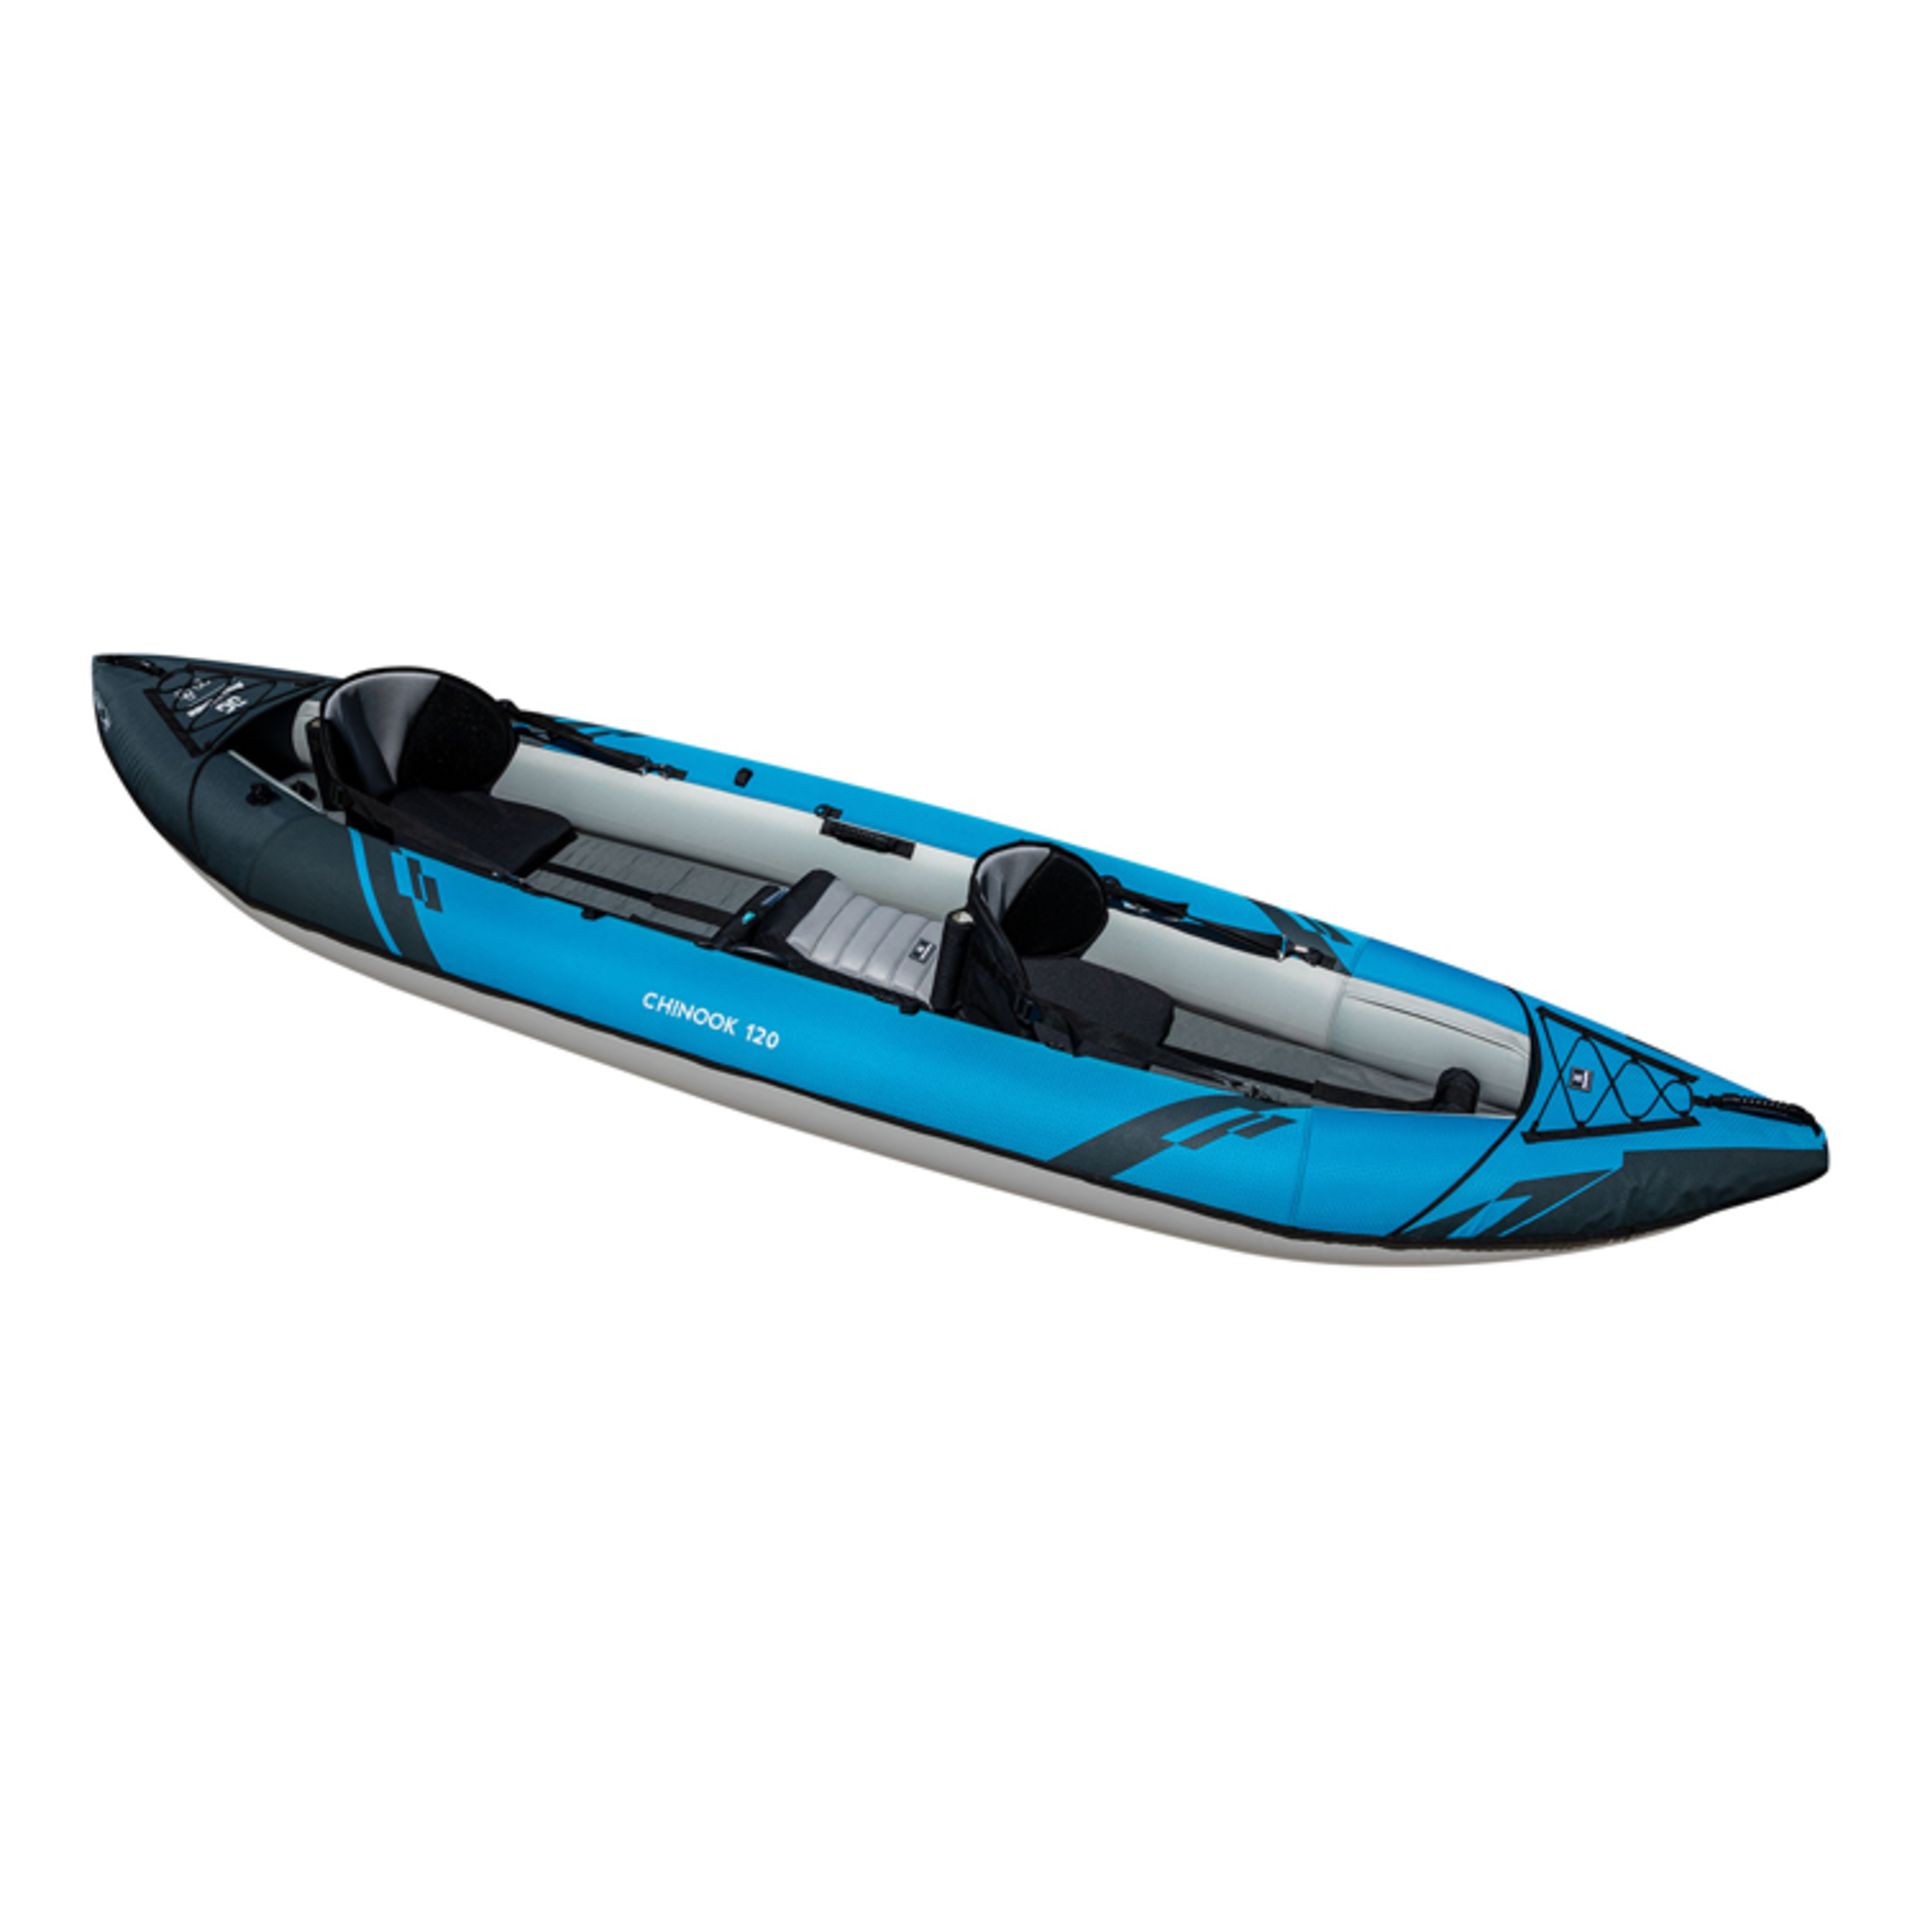 Aquaglide Chinook 120 1-2-Person Inflatable Recrea - Image 2 of 2